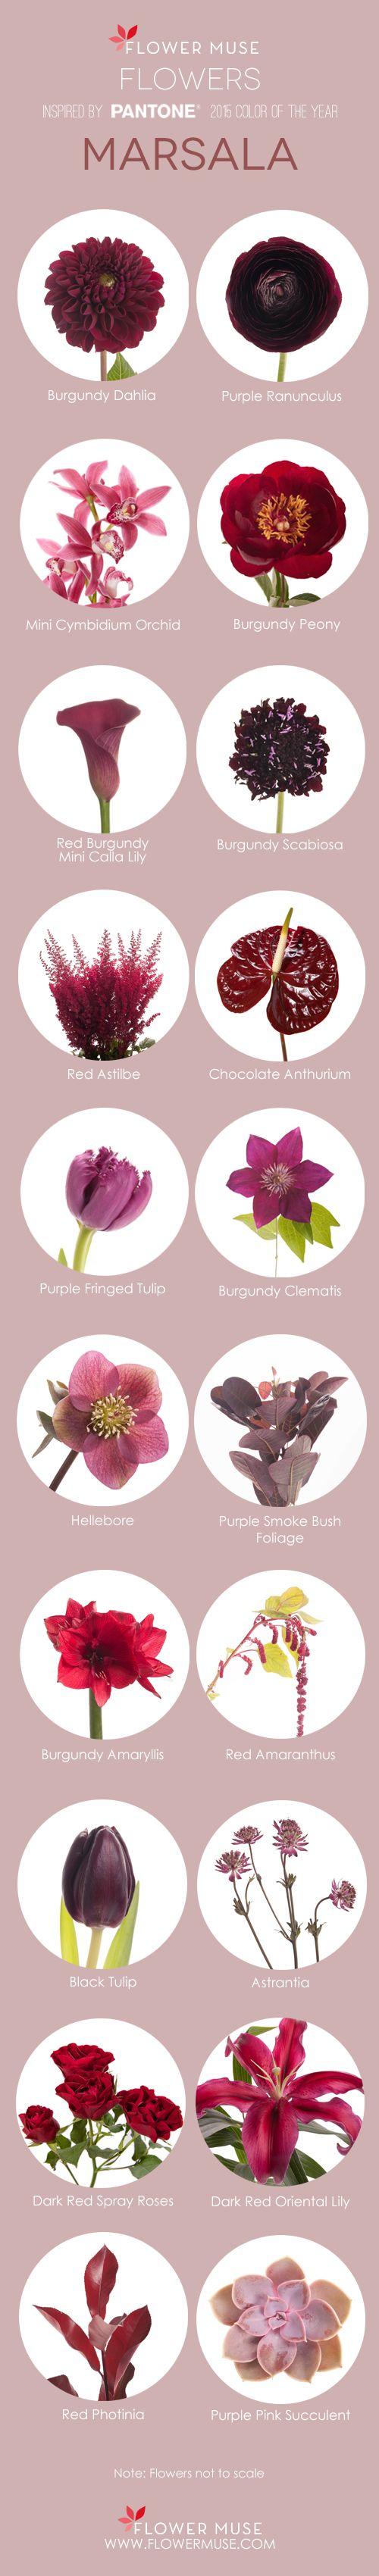 Hochzeit - Color Of The Year Marsala Flower Inspiration - Flower Muse Blog